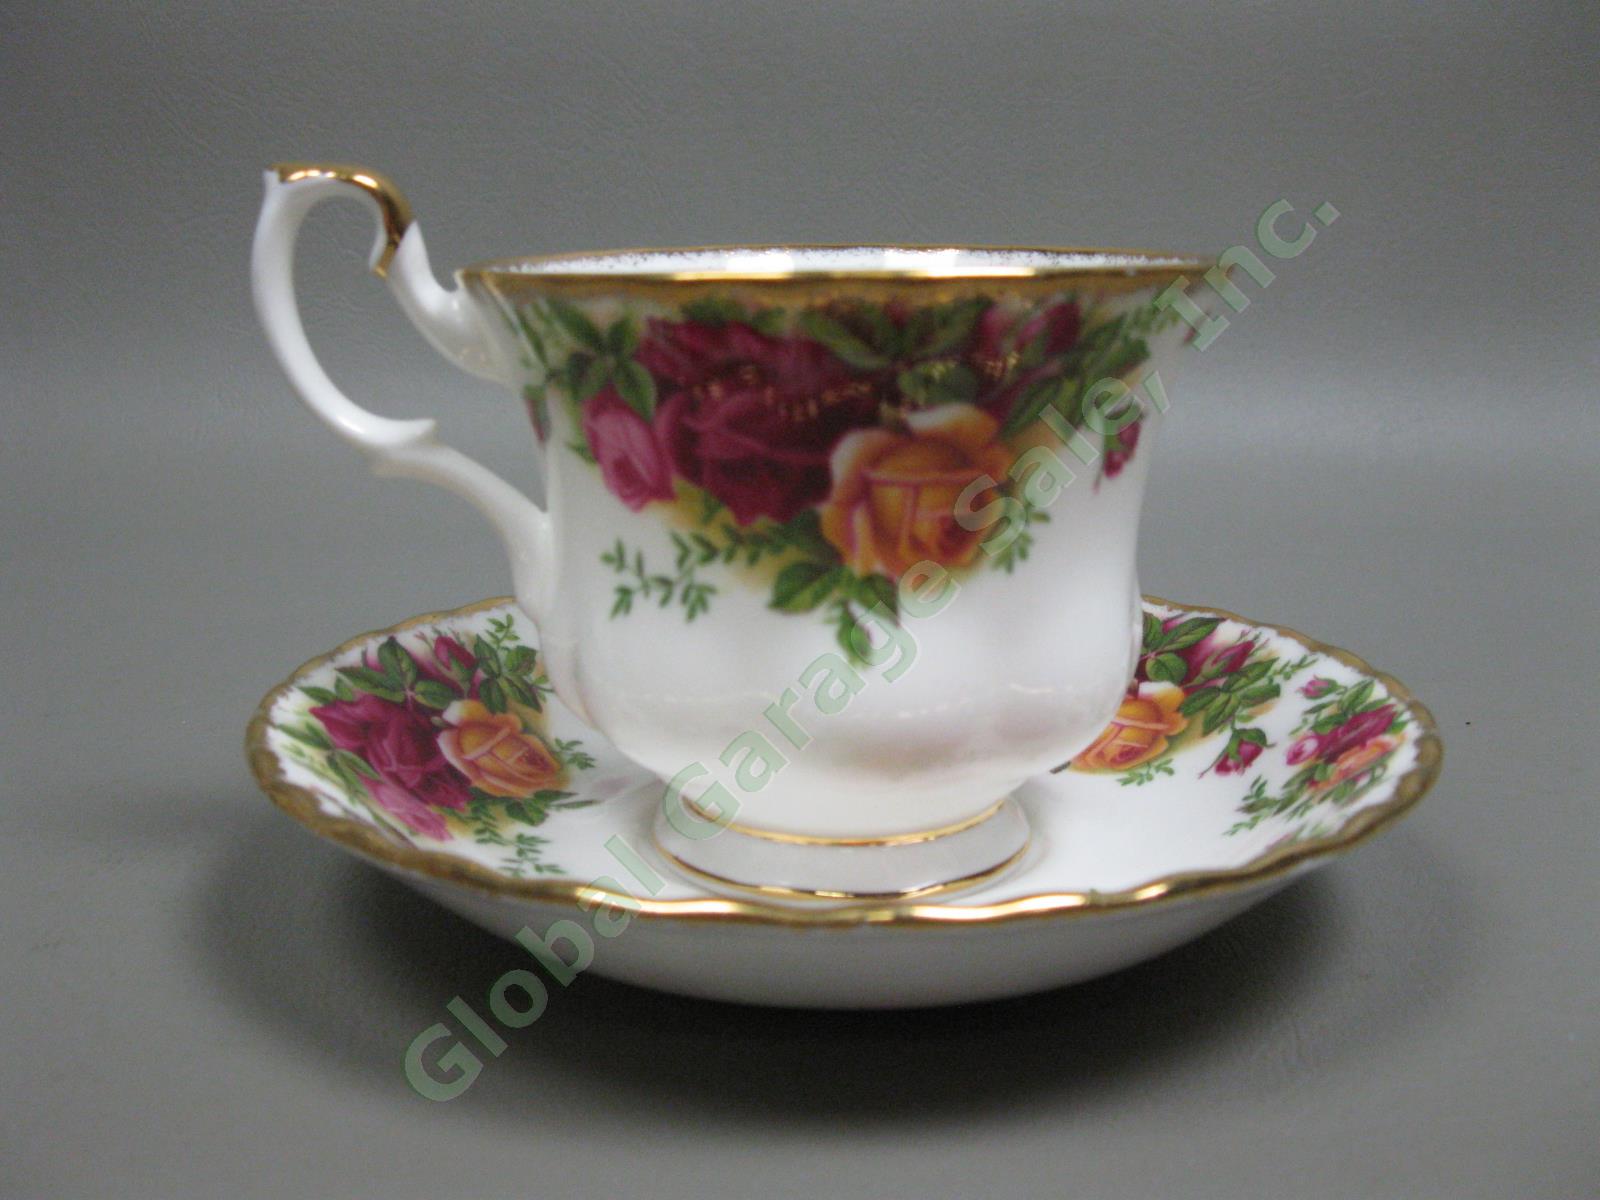 8 Royal Albert Old Country Roses Footed Tea Cup/Saucer Gold Trim Bone China Set 1